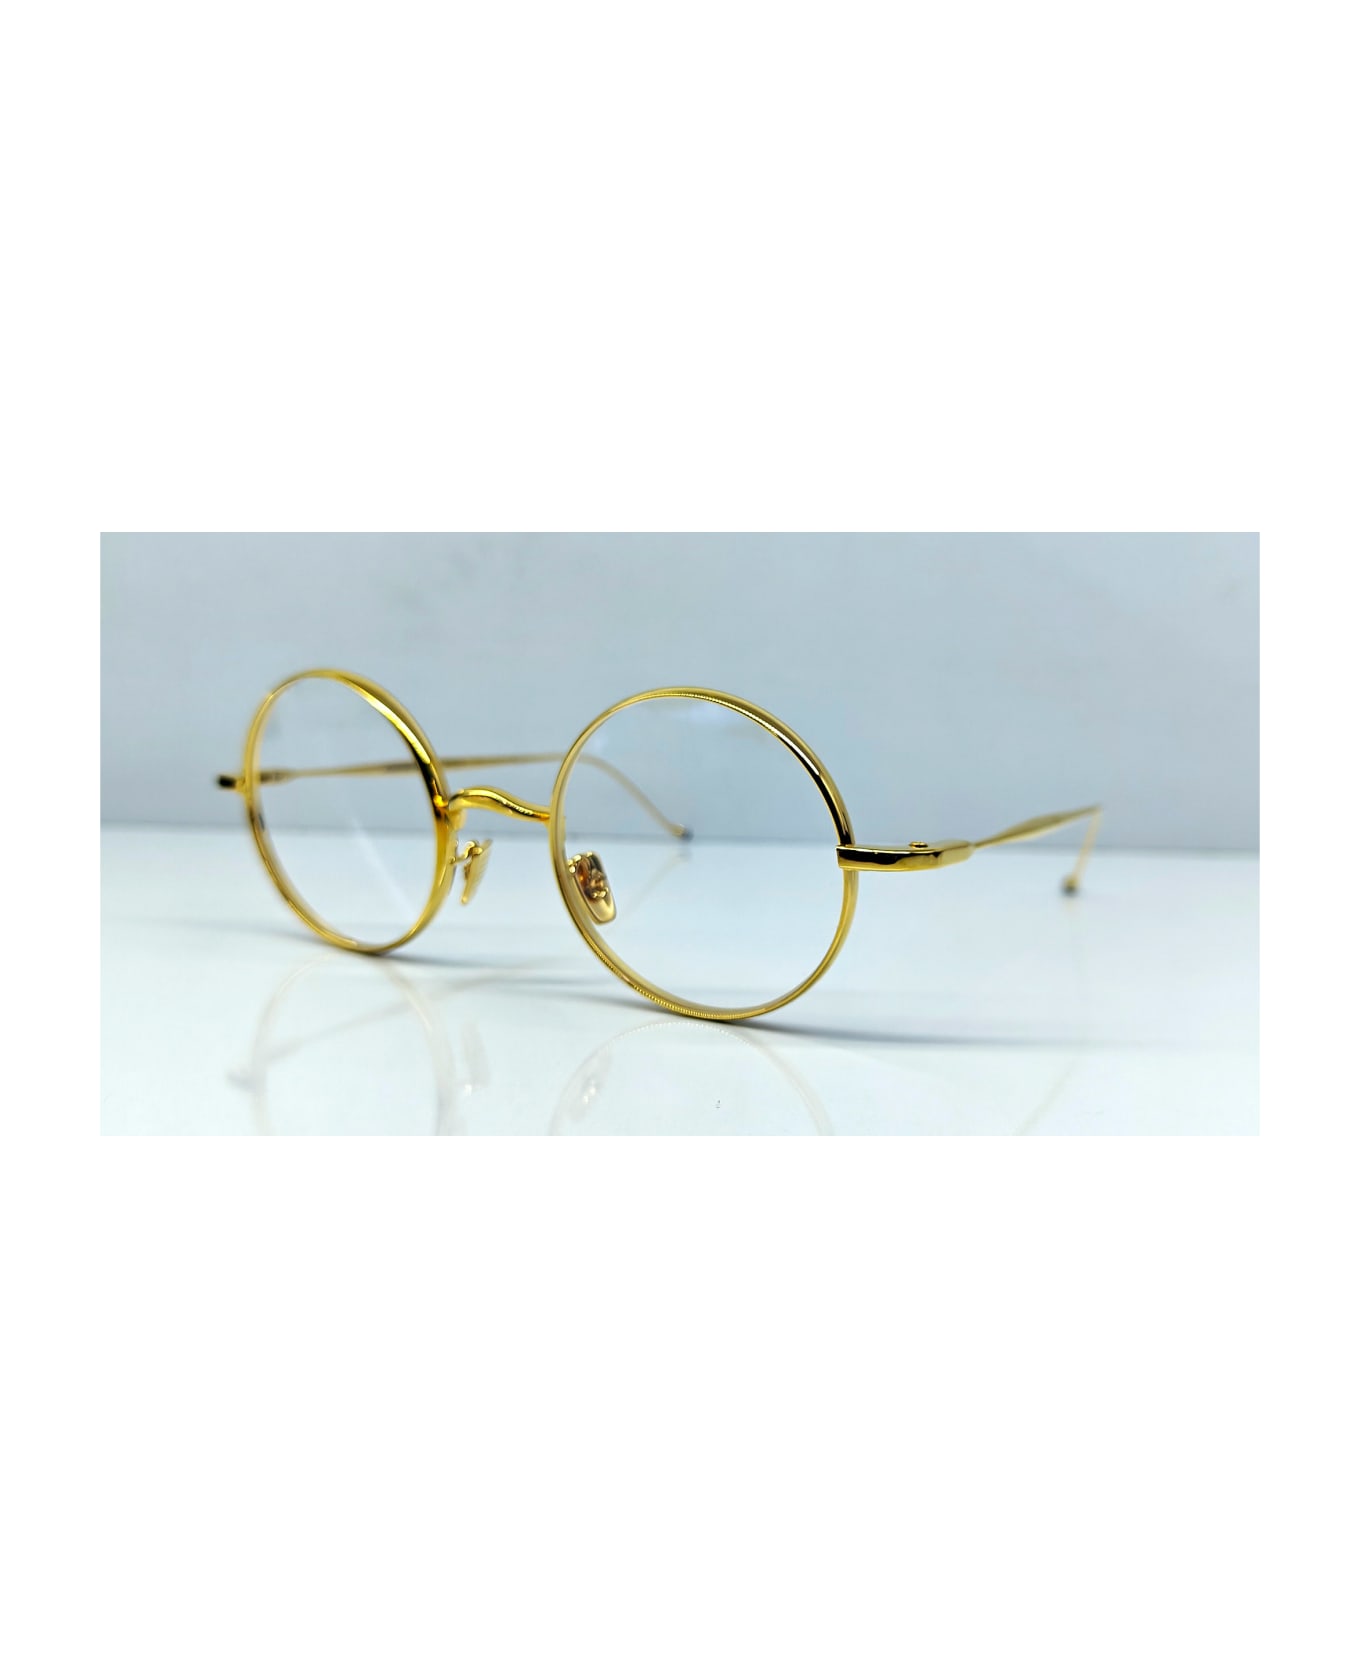 Jacques Marie Mage Diana - Gold Rx Glasses - Gold